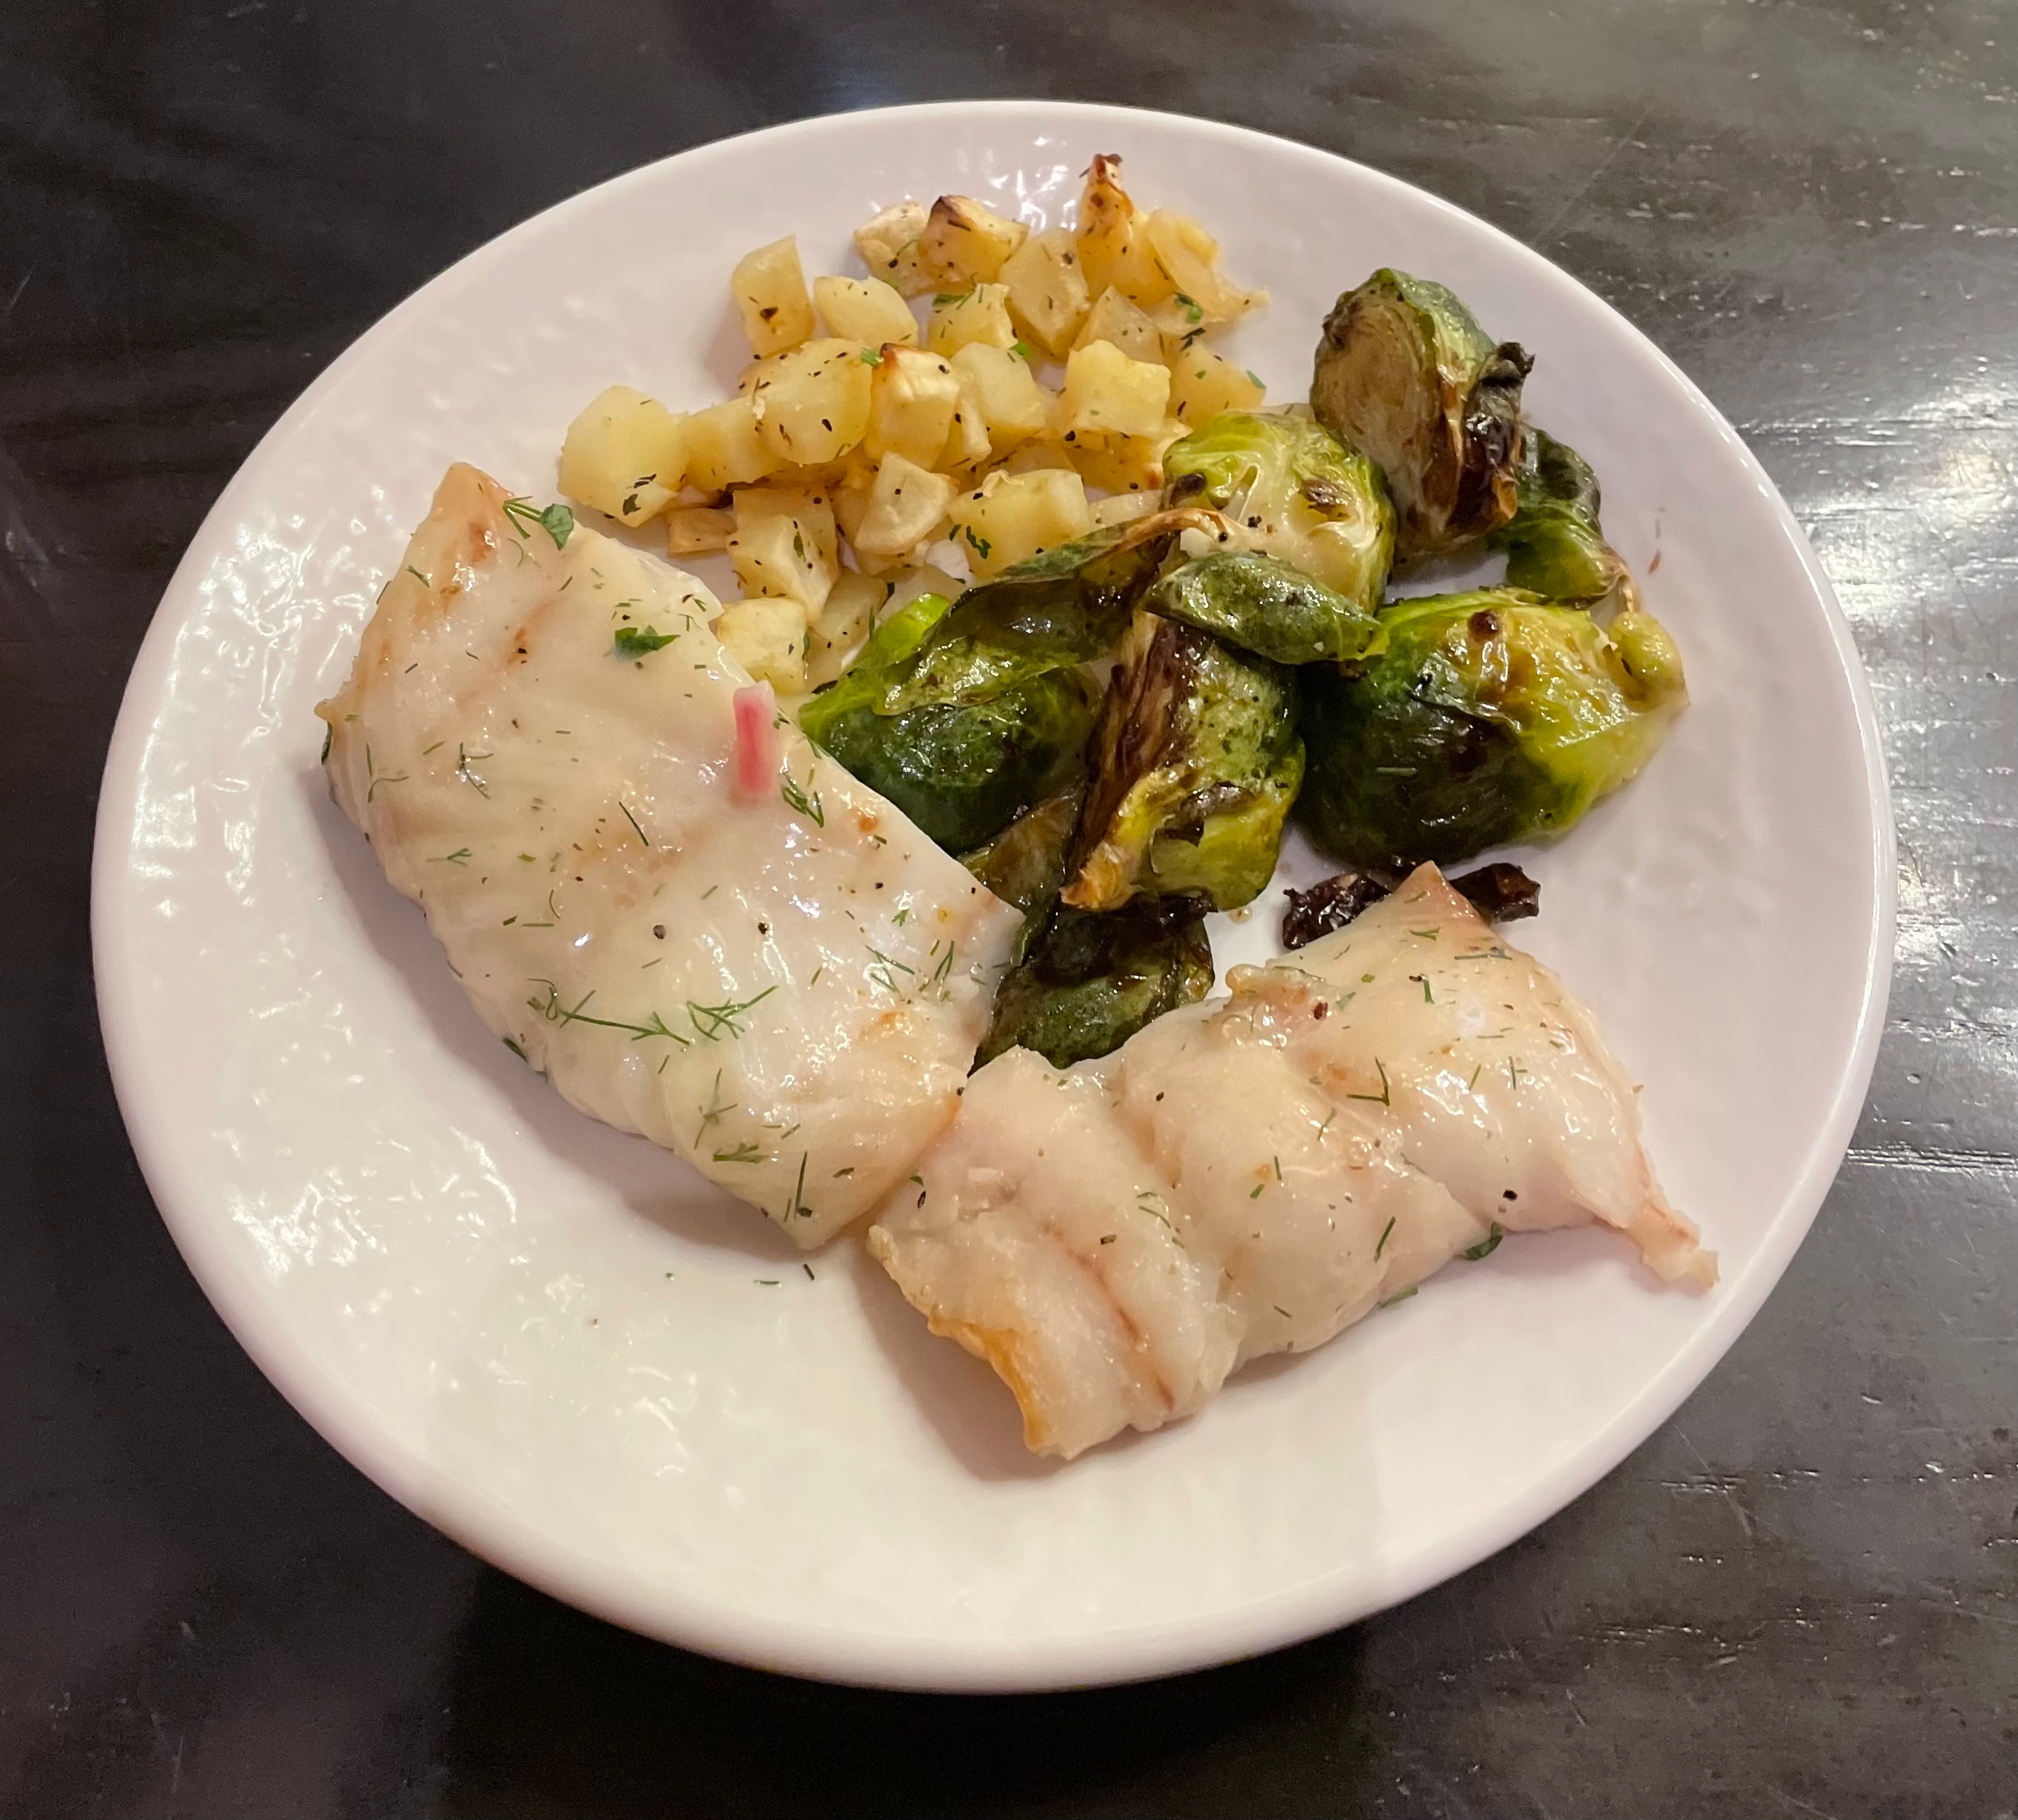 Fish, brussel sprouts, and potato cubes